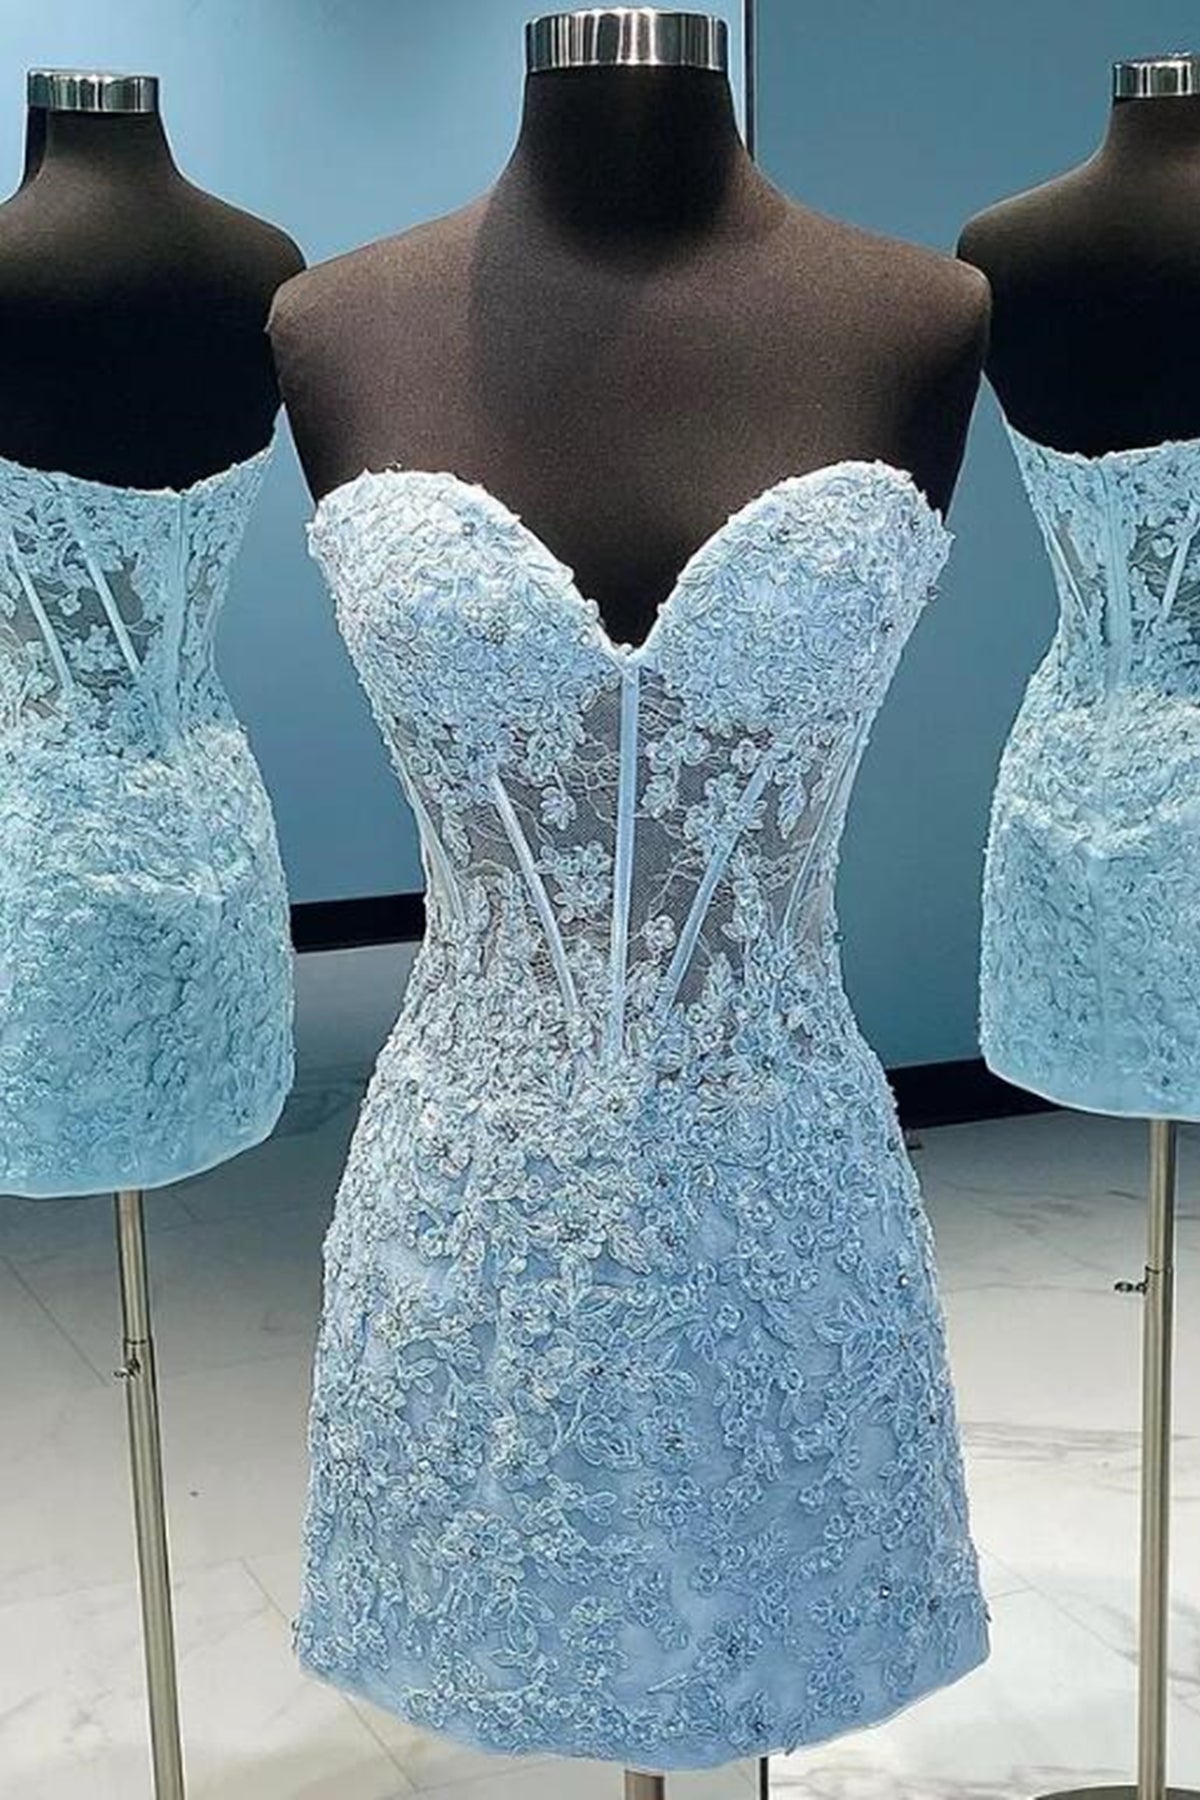 Blue Lace Strapless Sweetheart Neck Mermaid Short Prom Dresses, Blue Lace Homecoming Dresses, Blue Formal Evening Dresses WT1092